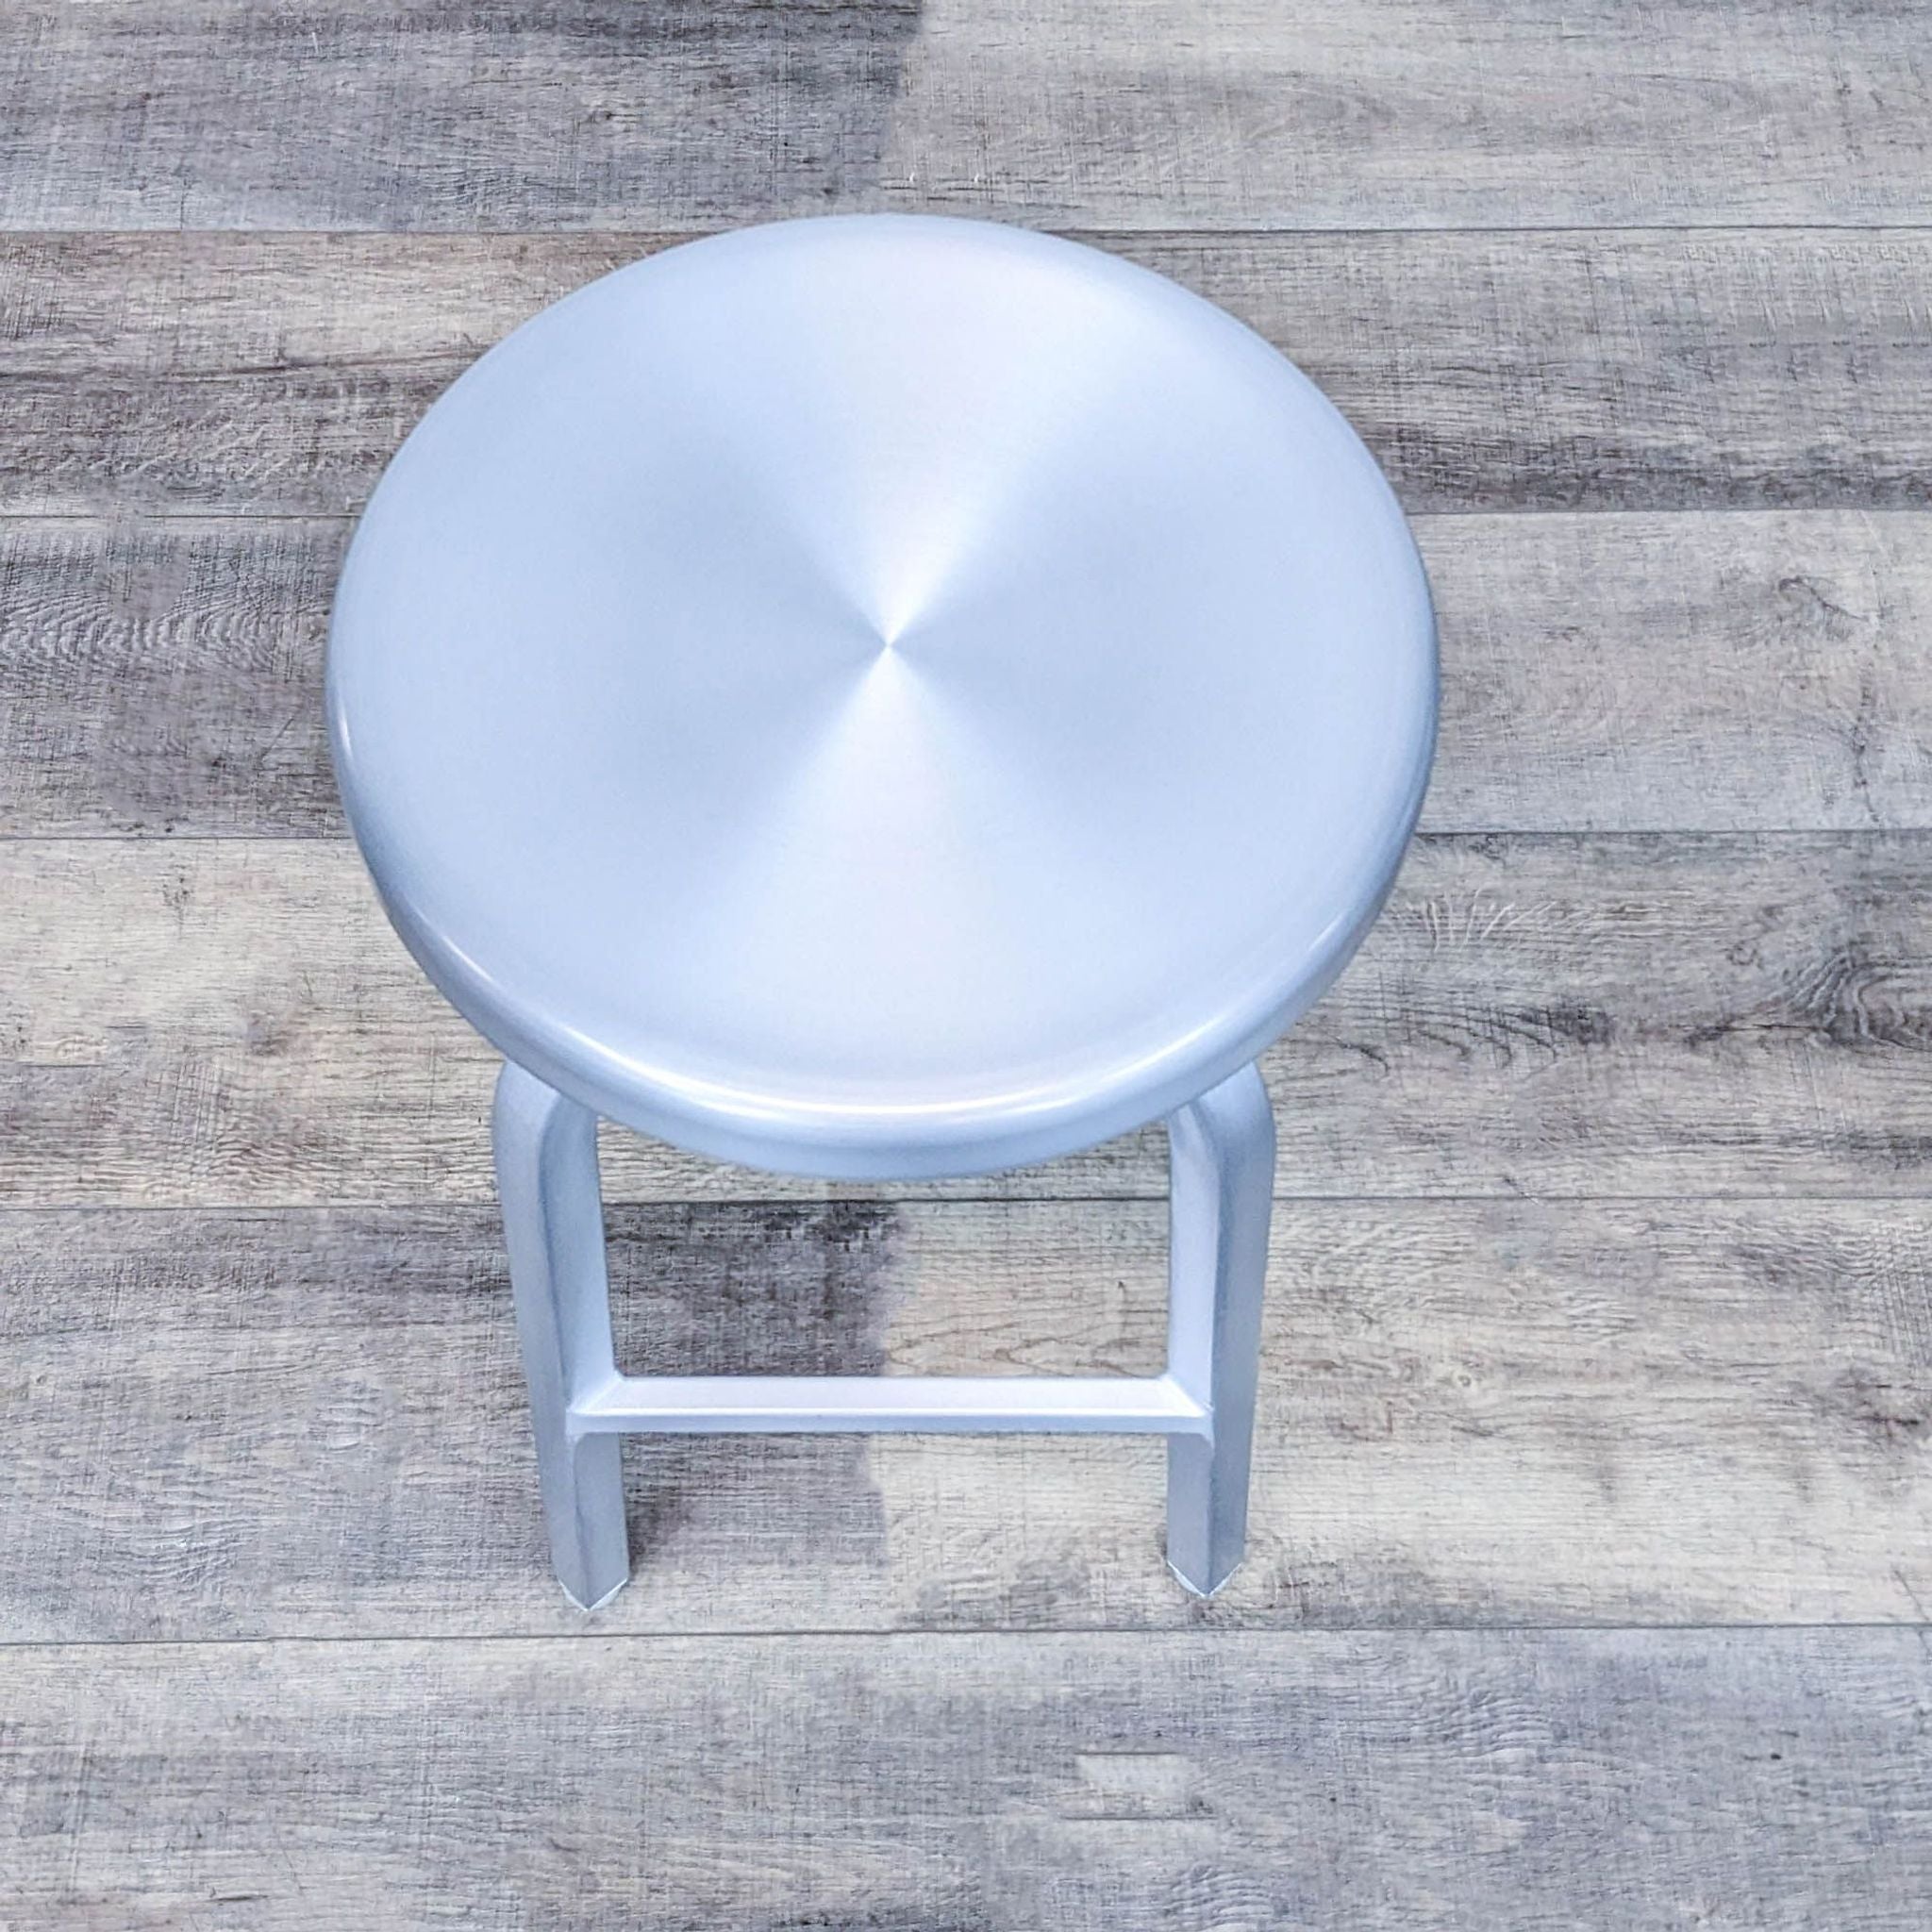 Reperch metal stool featuring a swivel seat with a sleek industrial look, against a wooden textured floor.